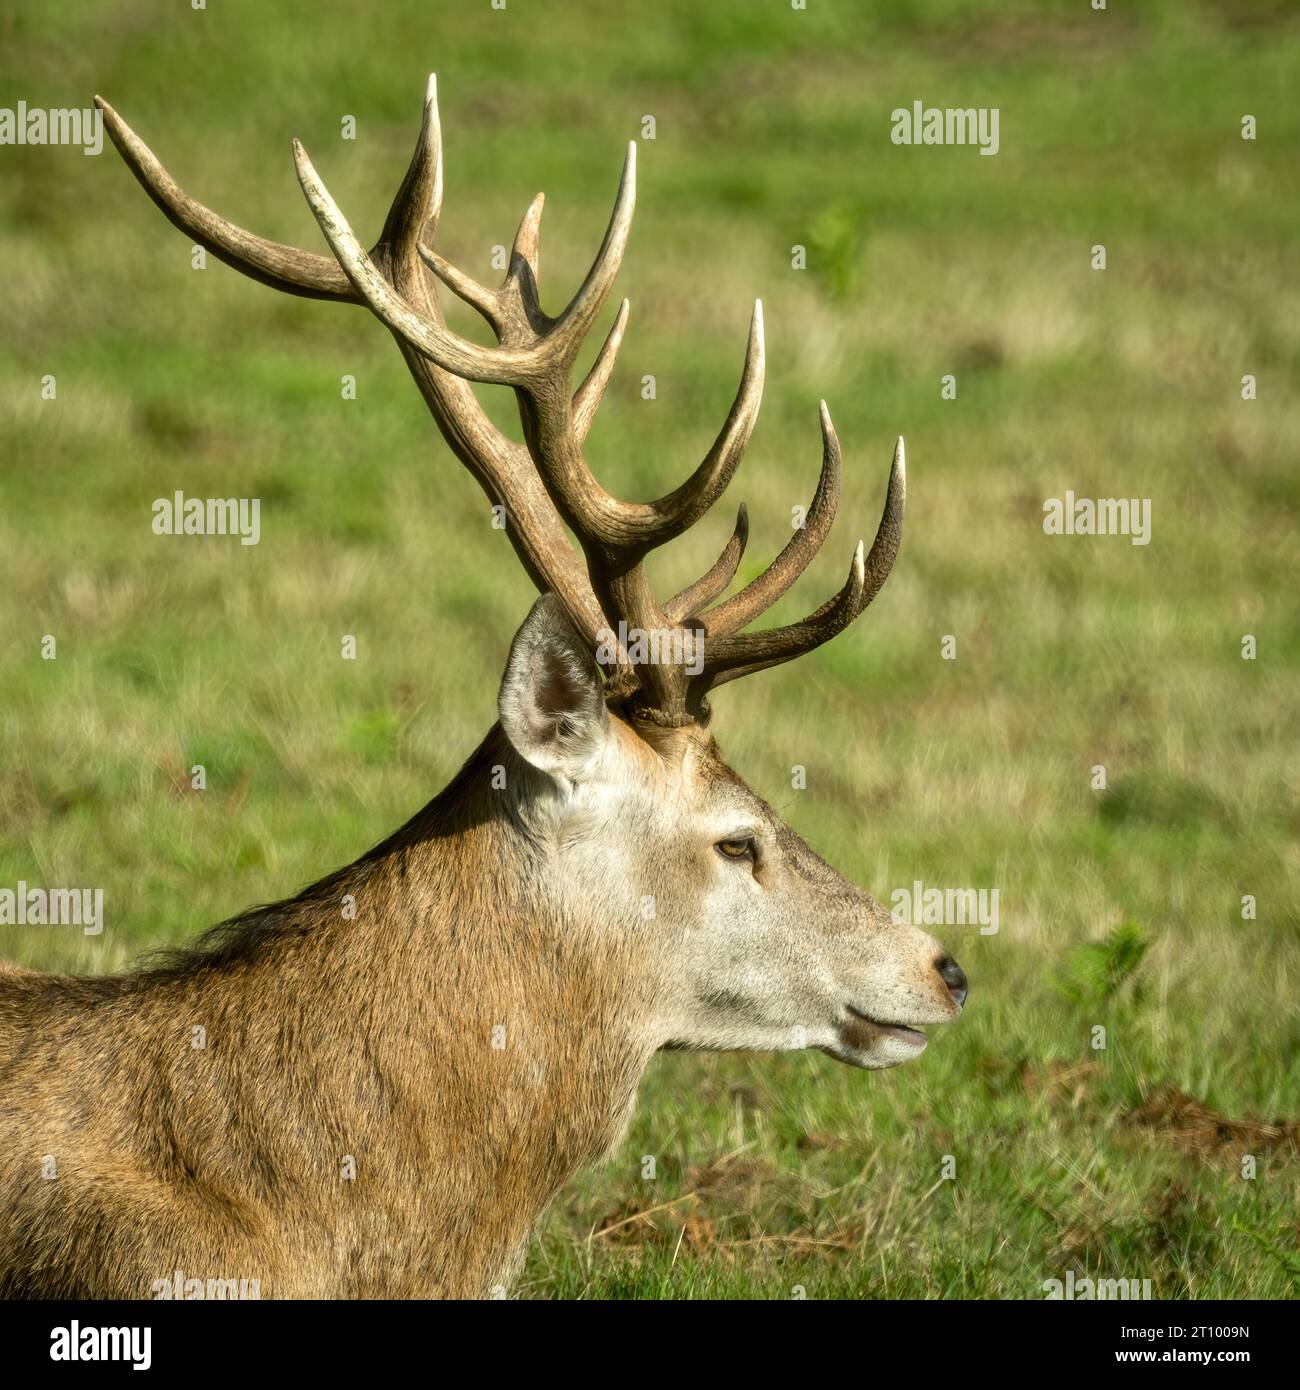 Red deer stag (Cervus Elaphus) with antlers against green grass background, Bradgate Park, Leicestershire, England, UK Stock Photo